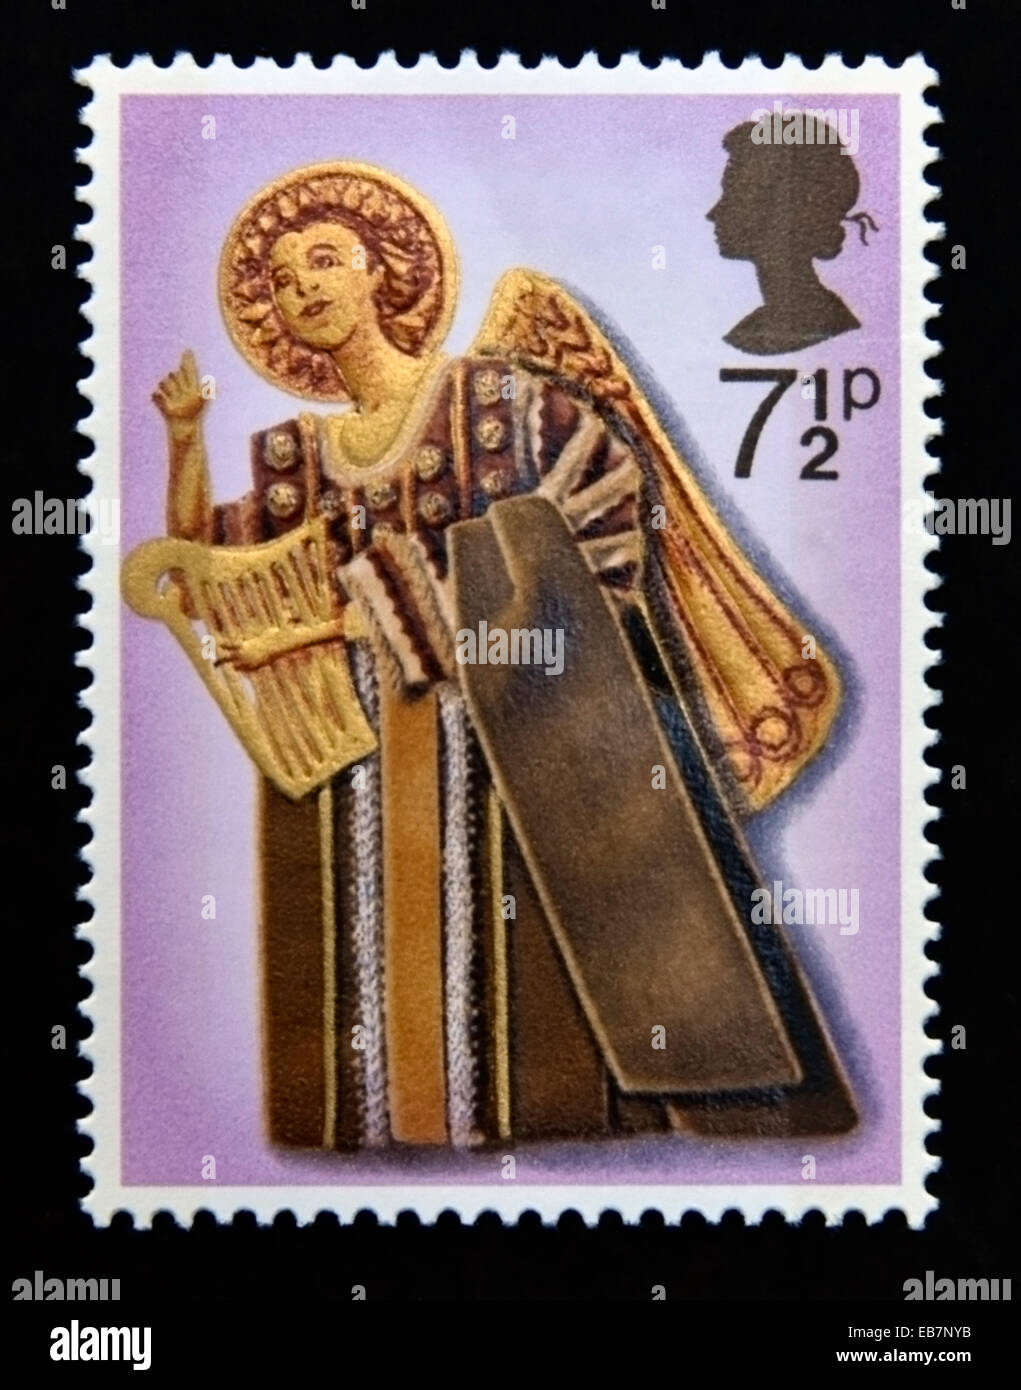 Postage stamp. Great Britain. Queen Elizabeth II. Christmas 1972. Angel playing Harp. 71/2p. Stock Photo